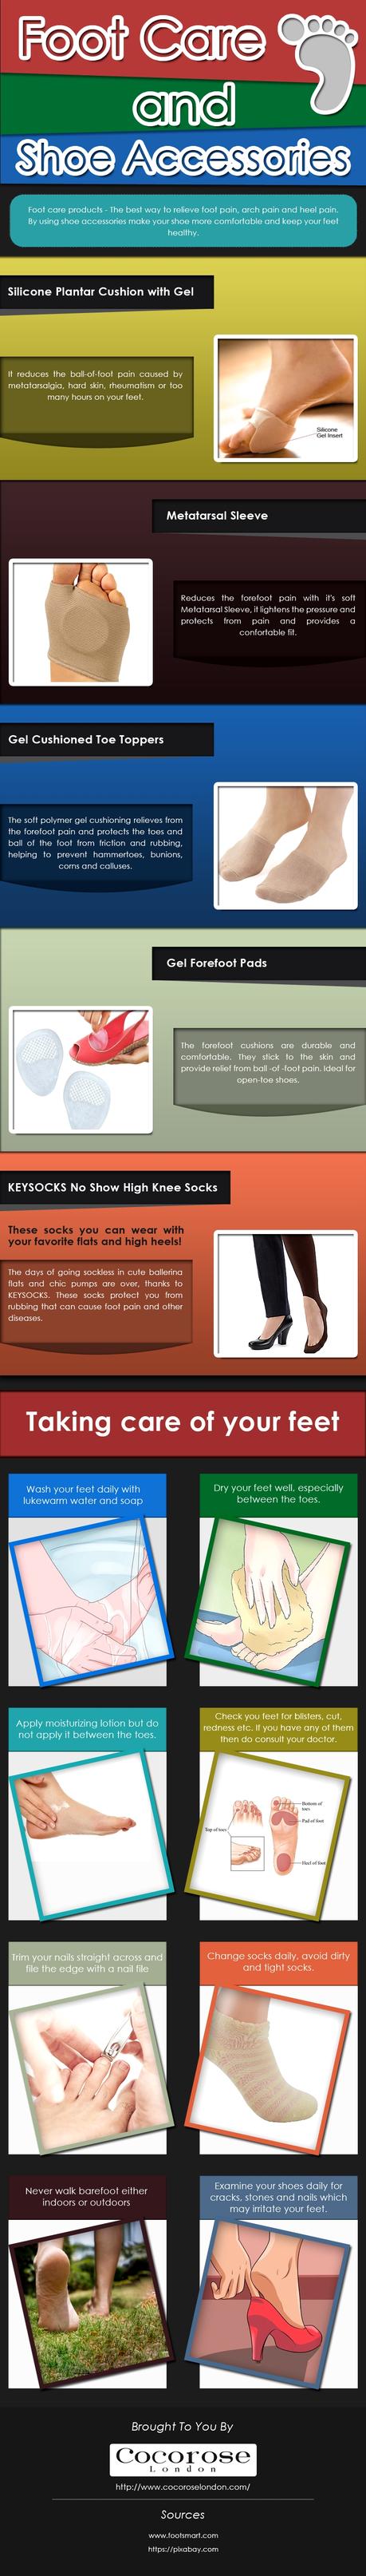 Foot Care and Shoe Accessories